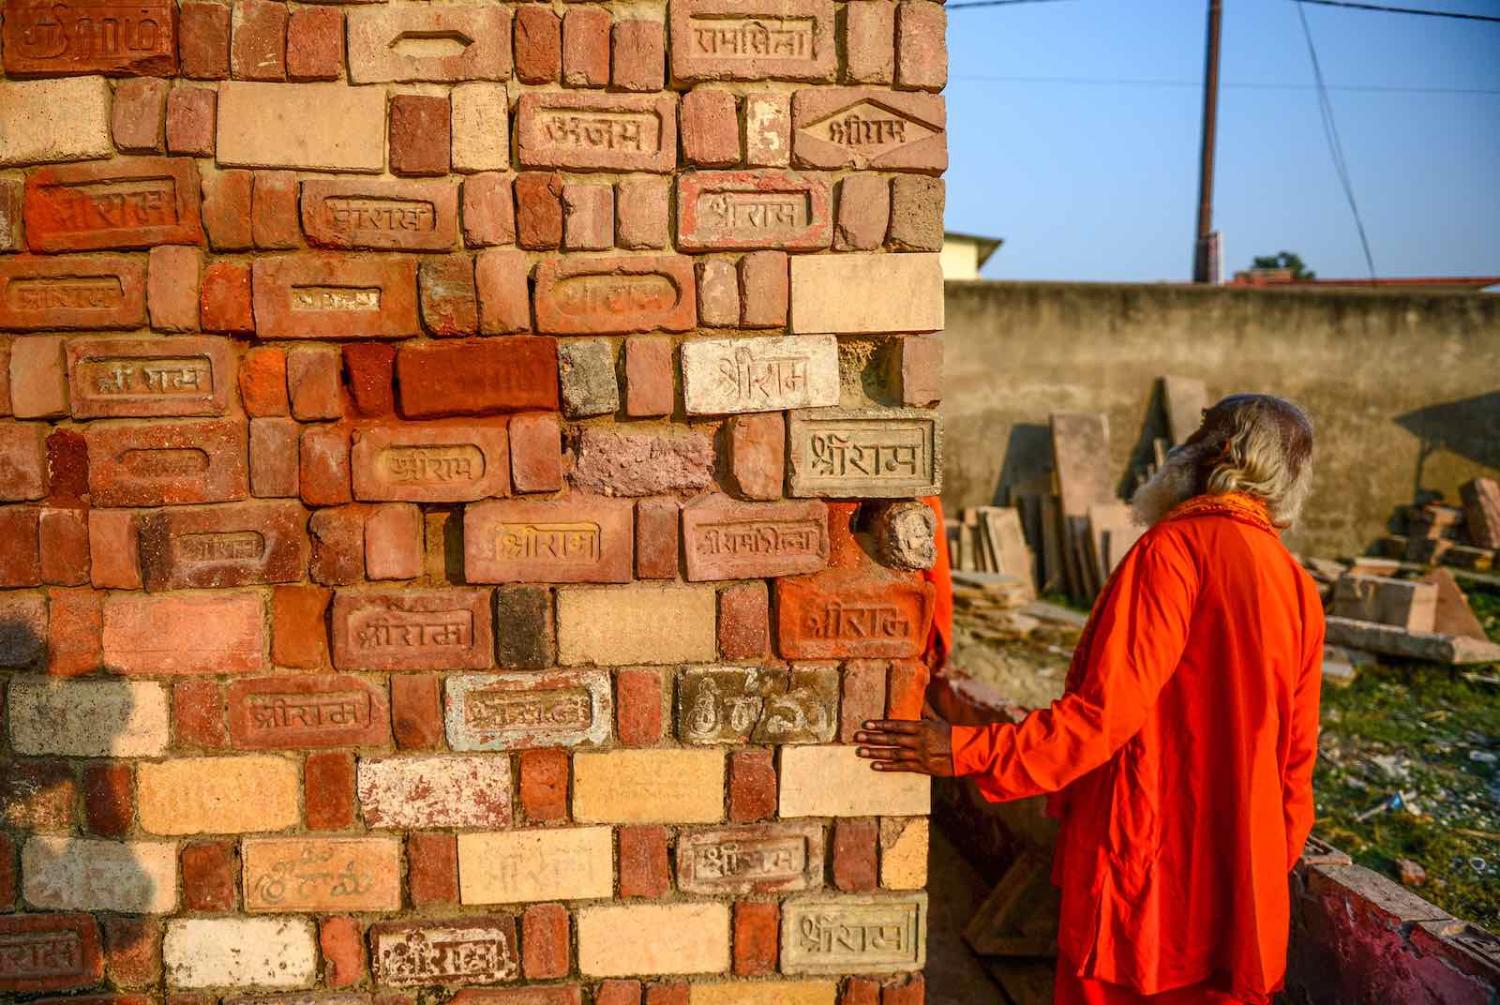 A Sadhu with bricks for the proposed Rama temple in Ayodhya following the Supreme Court verdict on the disputed religious site (Photo: Sanjay Kanojia/AFP/Getty Images)